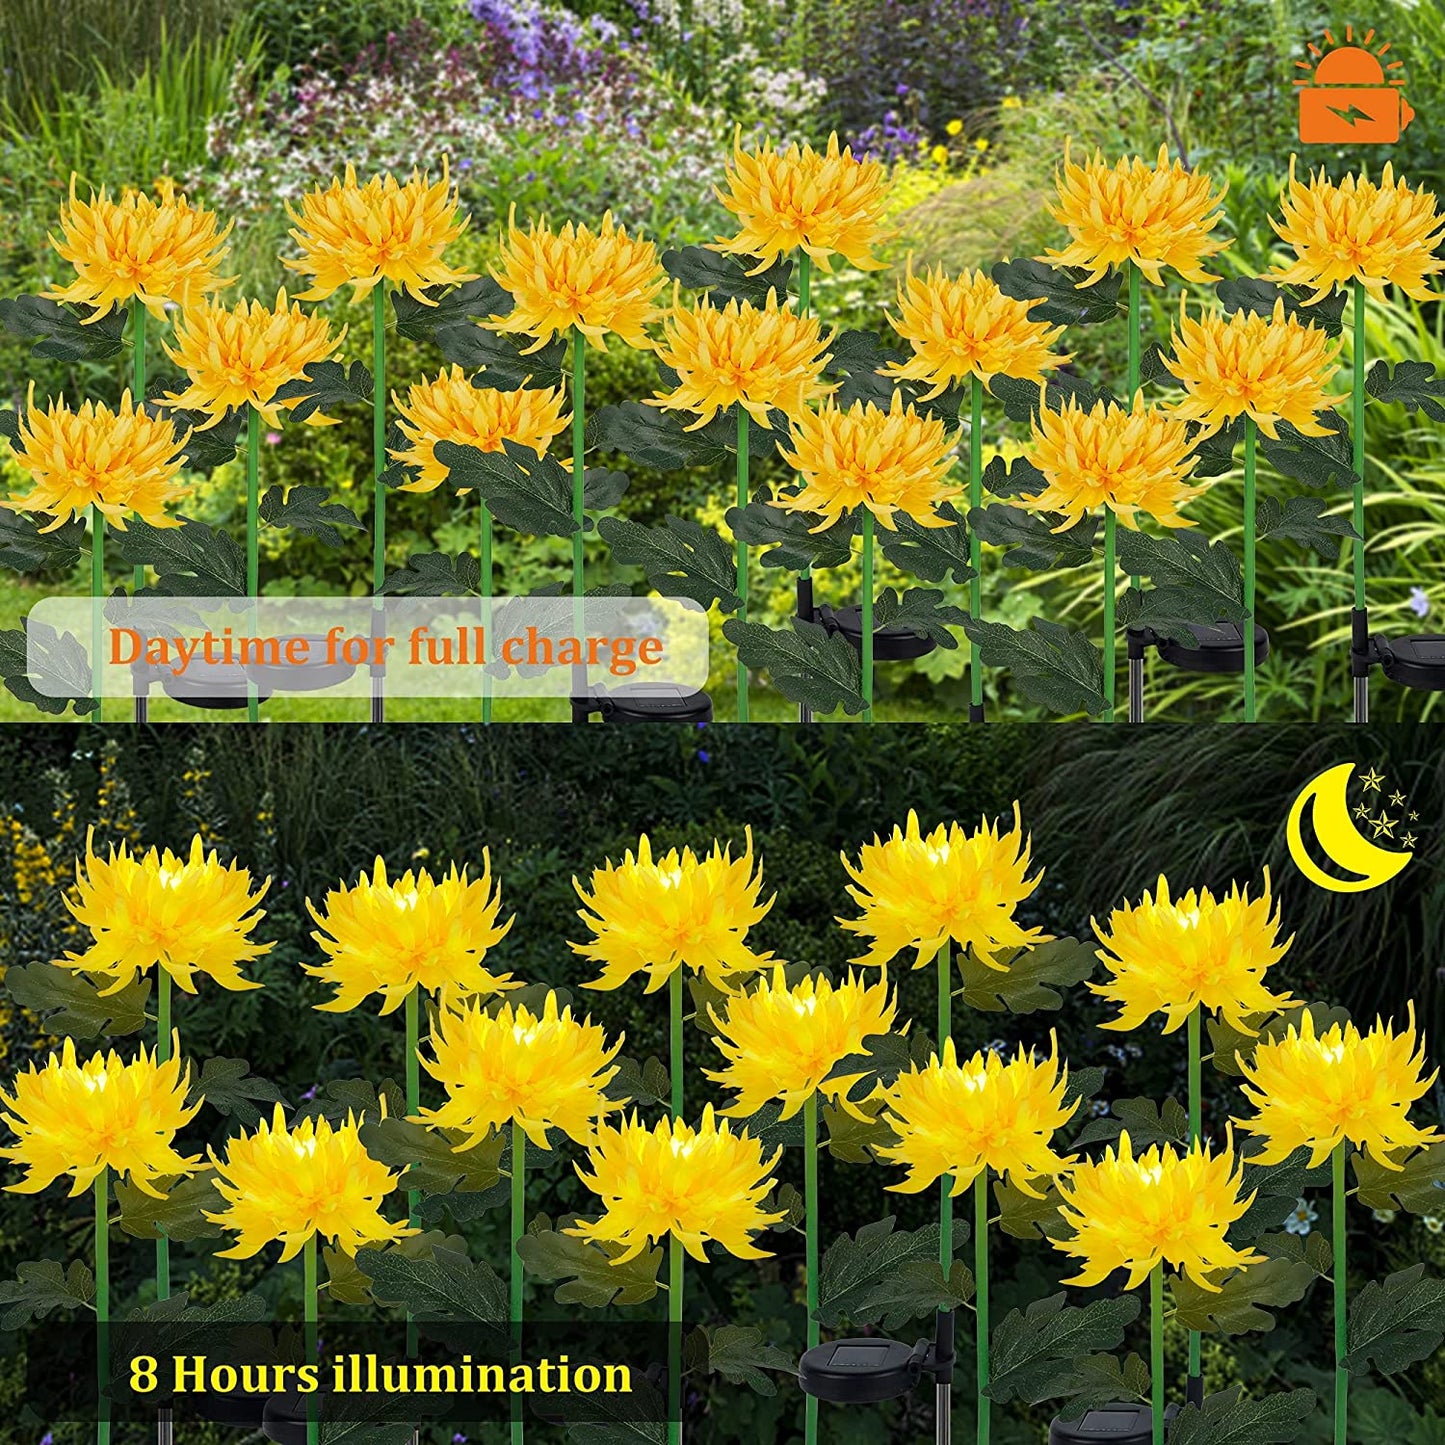  2 Pack Solar Garden Stake Lights, Outdoor Chrysanthemum Lights, LED Solar Powered Lights for Patio Lawn Garden Yard Pathway Decoration, Yellow